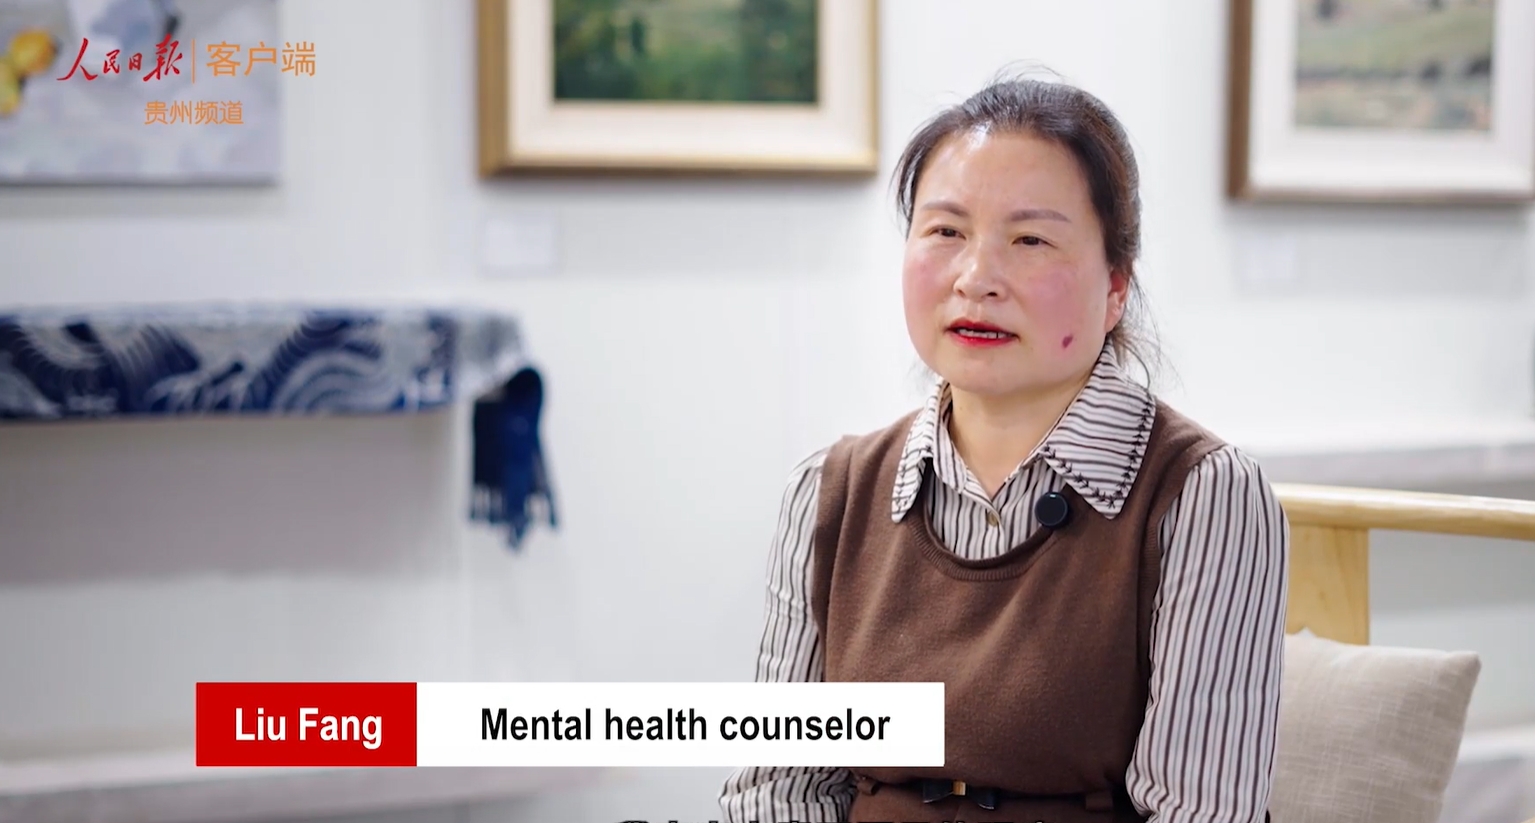 Visually impaired mental health counselor: 'I aim to be the students' trusted confidant'